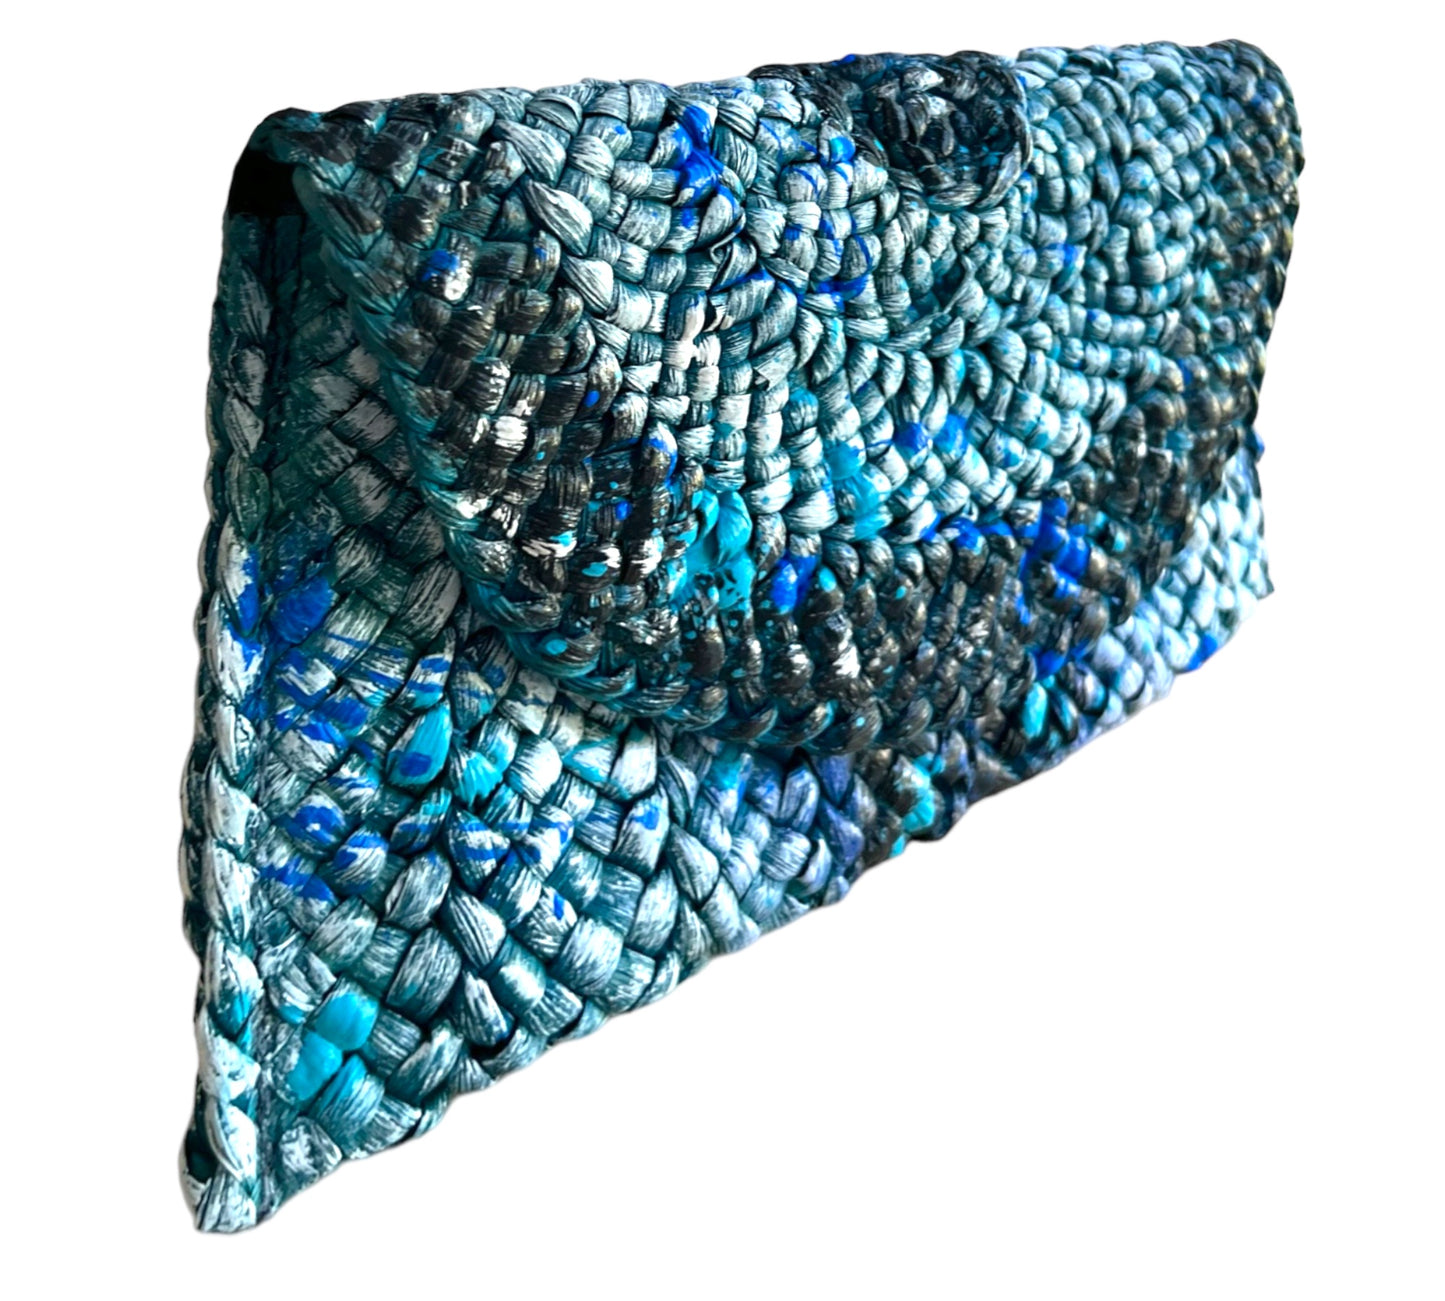 Hand-Painted Blue and Turquoise Straw Clutch